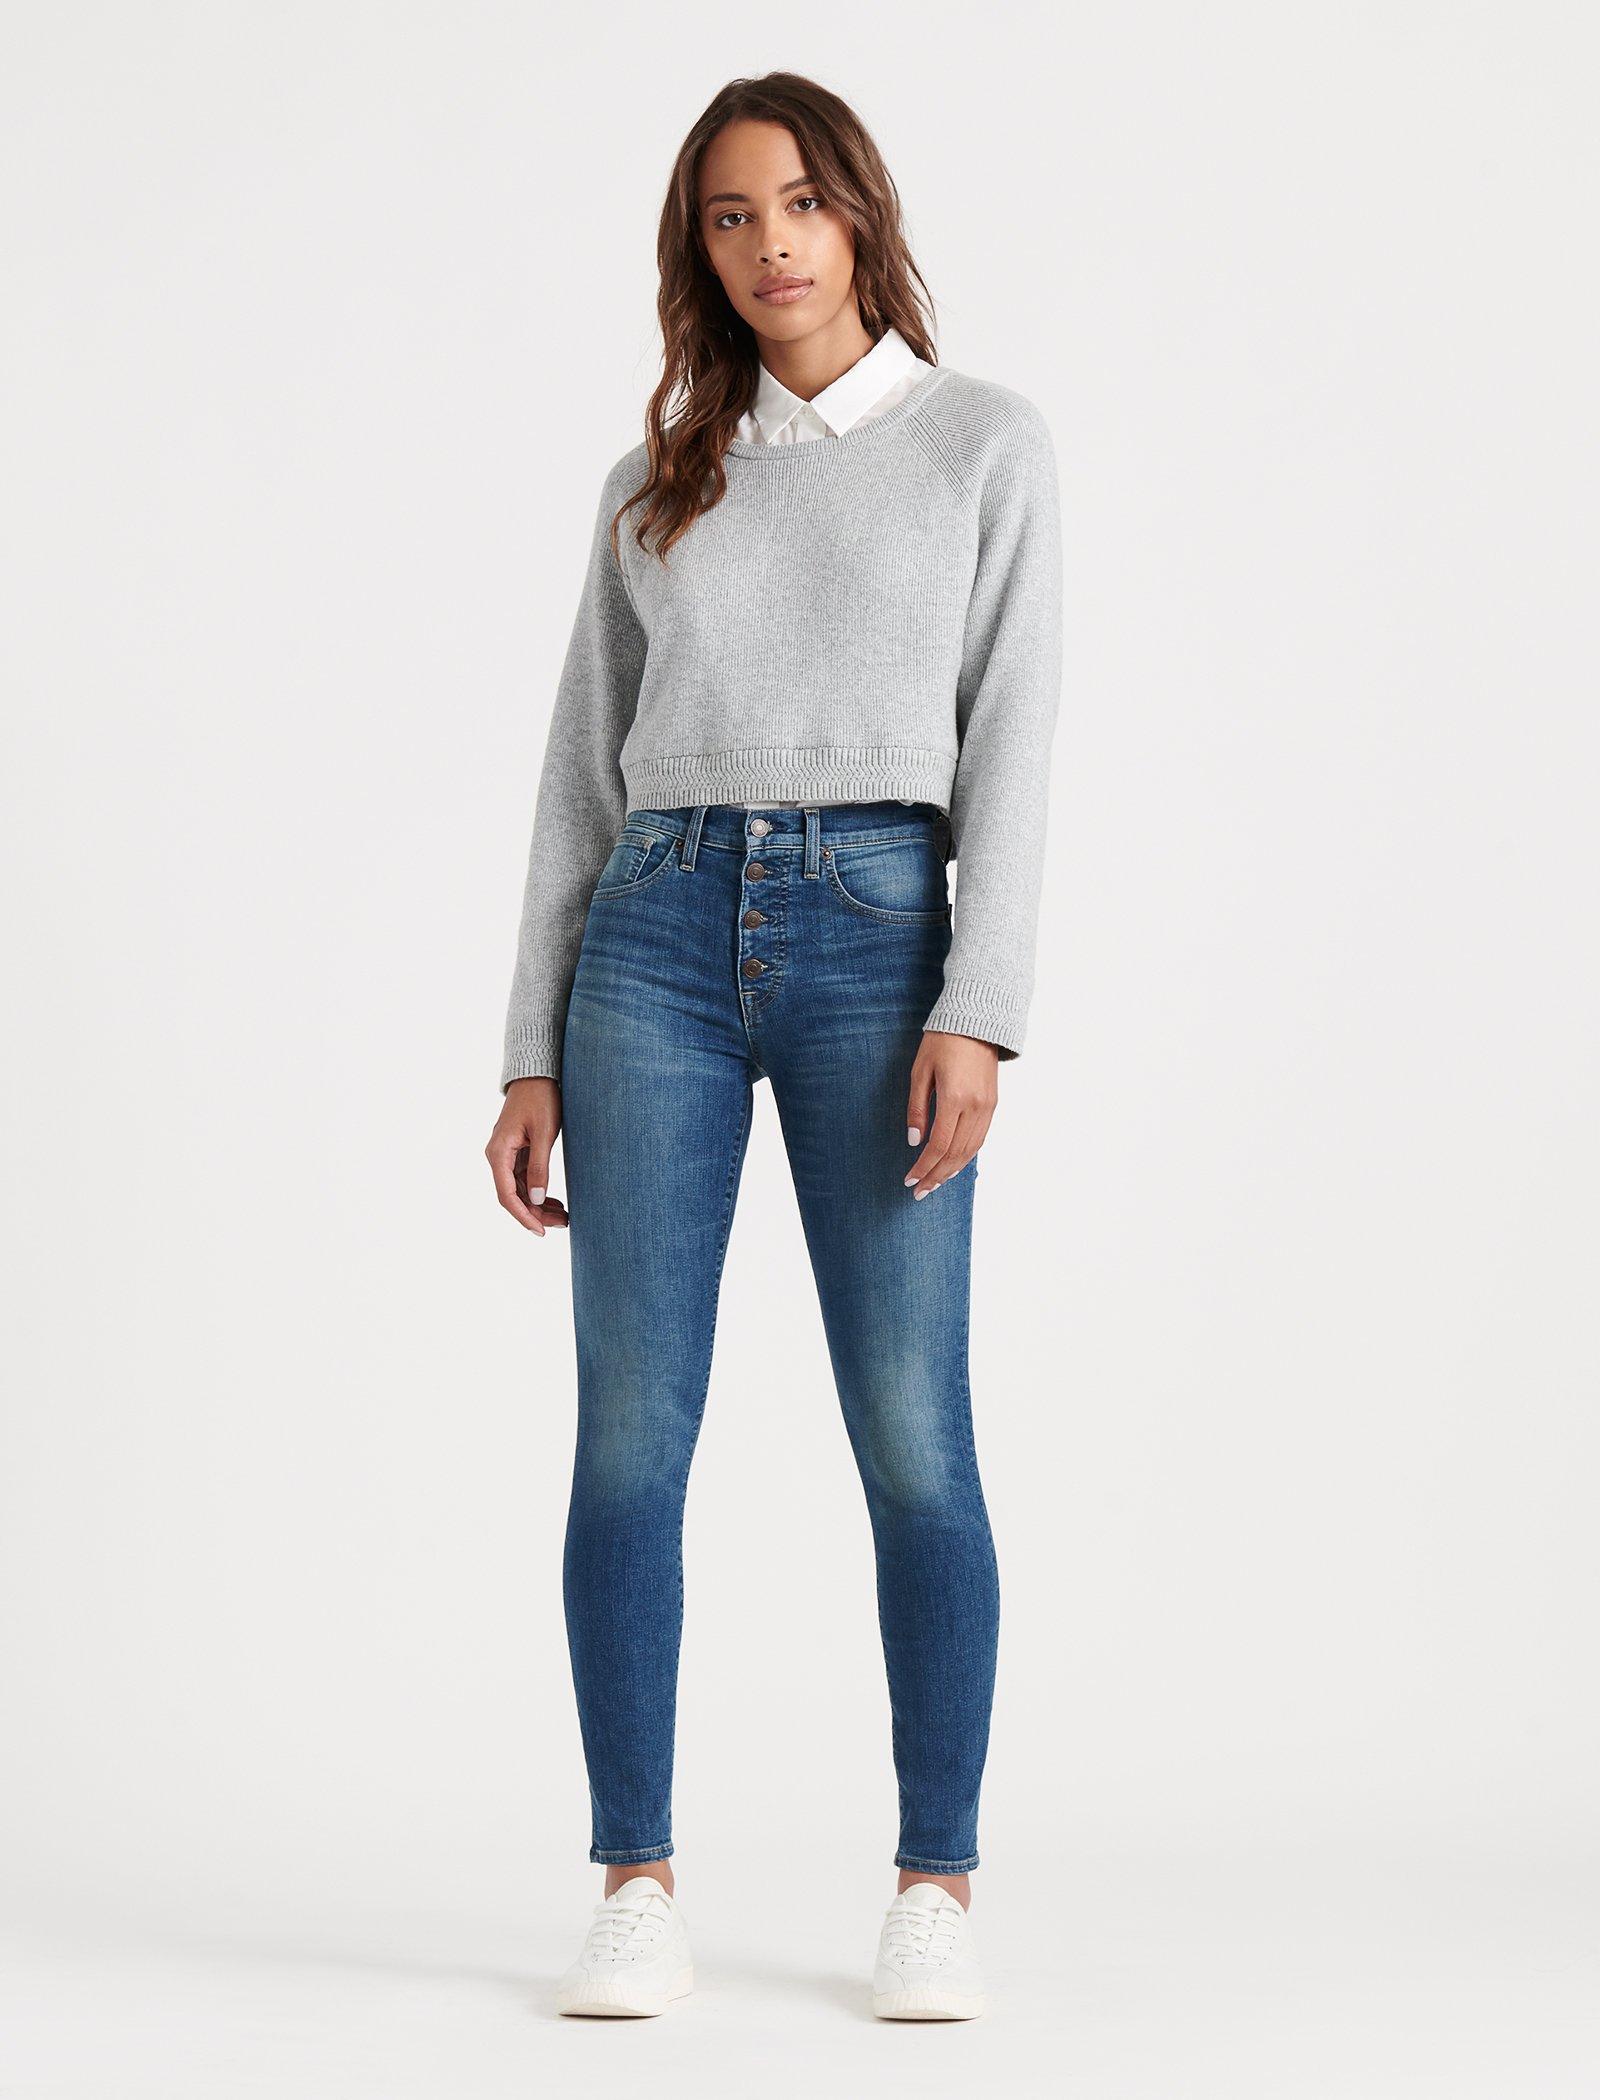 lucky brand clothing for women